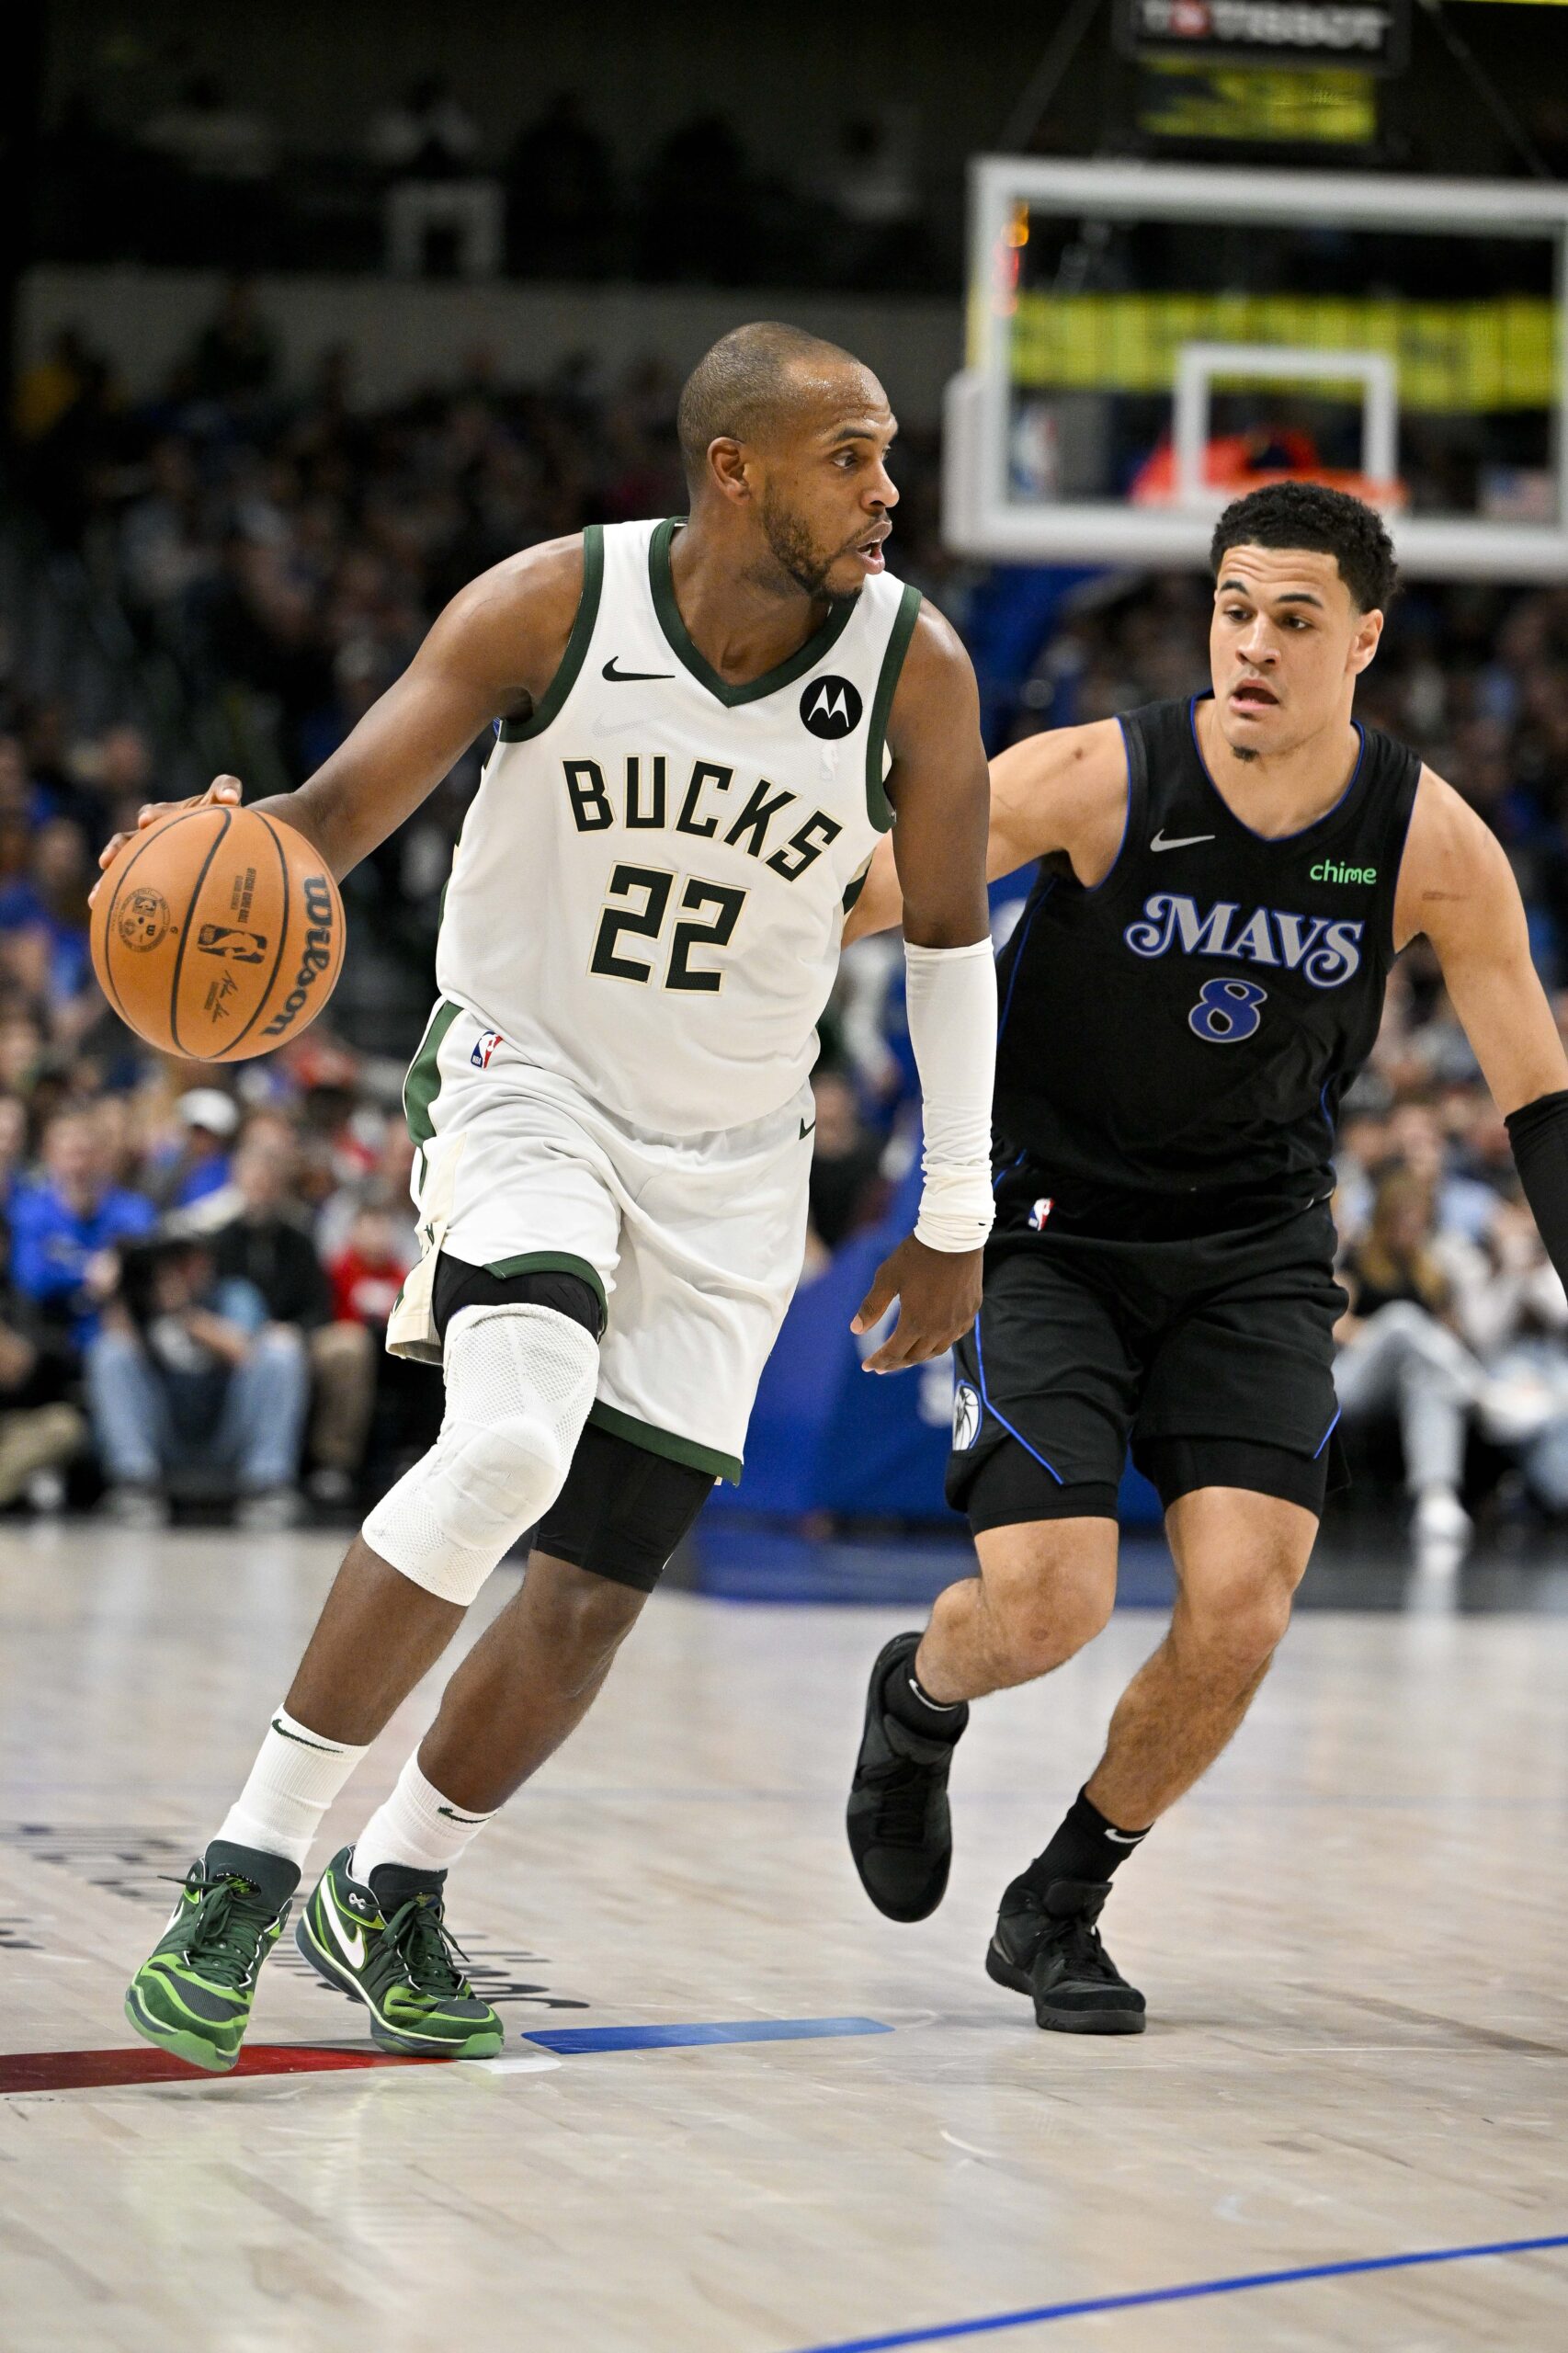 Feb 3, 2024; Dallas, Texas, USA; Milwaukee Bucks forward Khris Middleton (22) and Dallas Mavericks guard Josh Green (8) in action during the game between the Dallas Mavericks and the Milwaukee Bucks at the American Airlines Center. Mandatory Credit: Jerome Miron-USA TODAY Sports